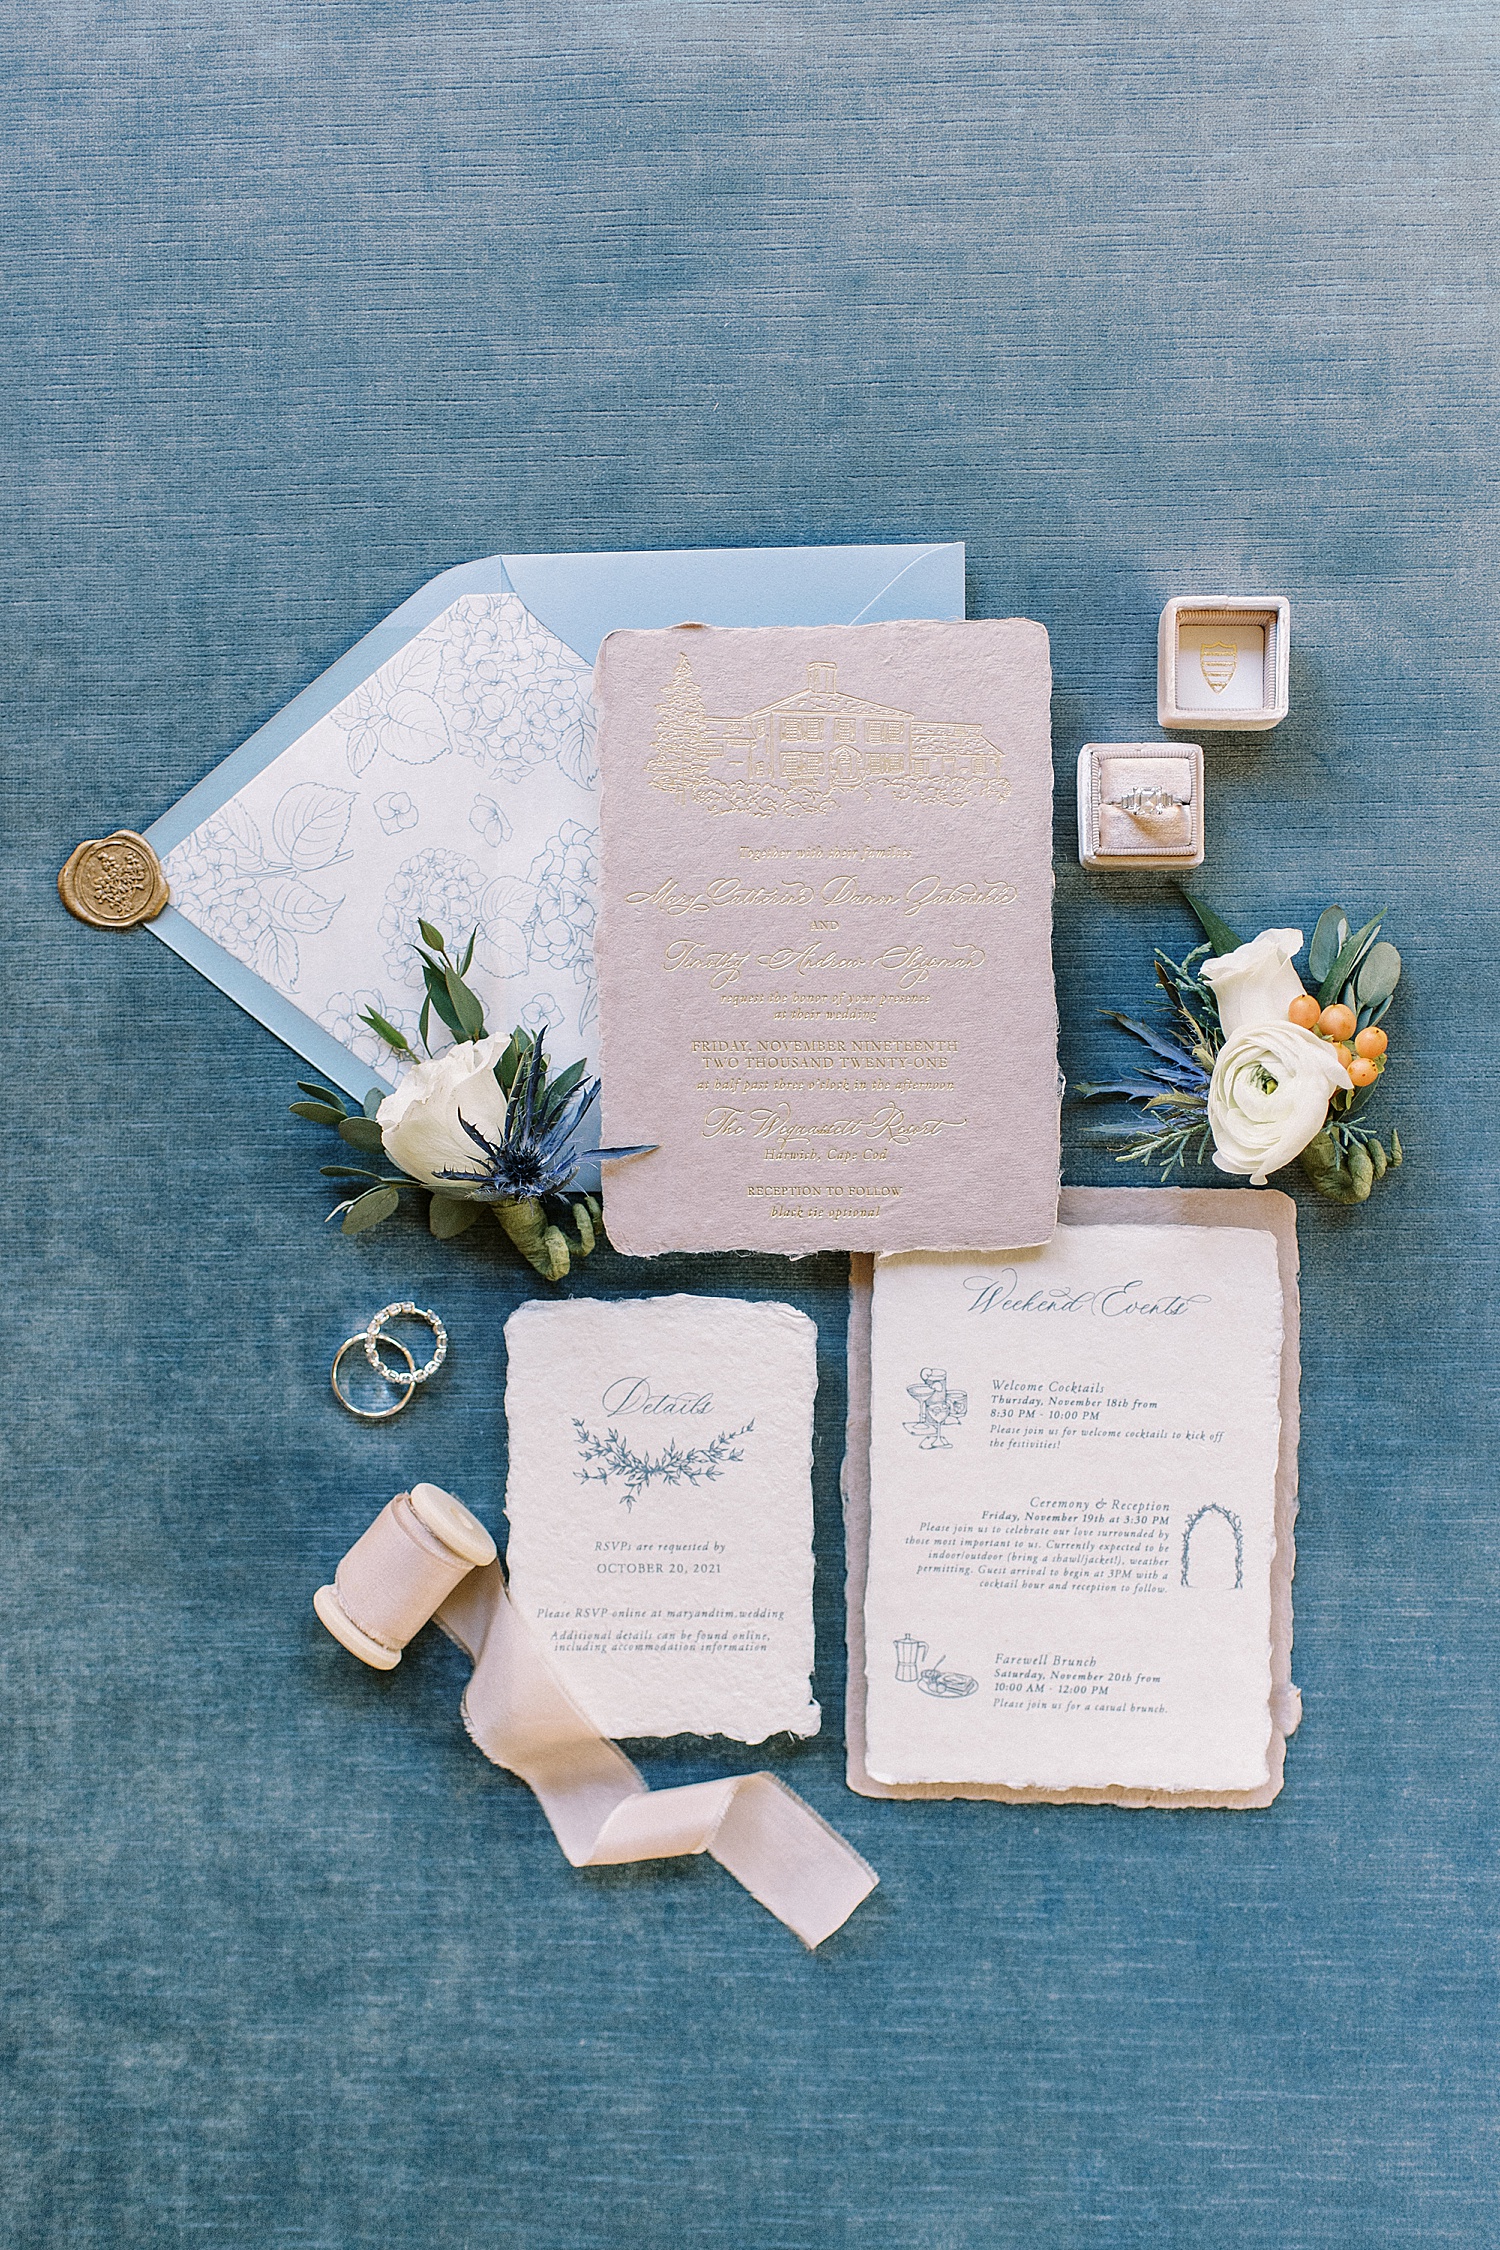 Beautiful wedding invitation suite on blue linen background by New York Photographer Lynne Reznick